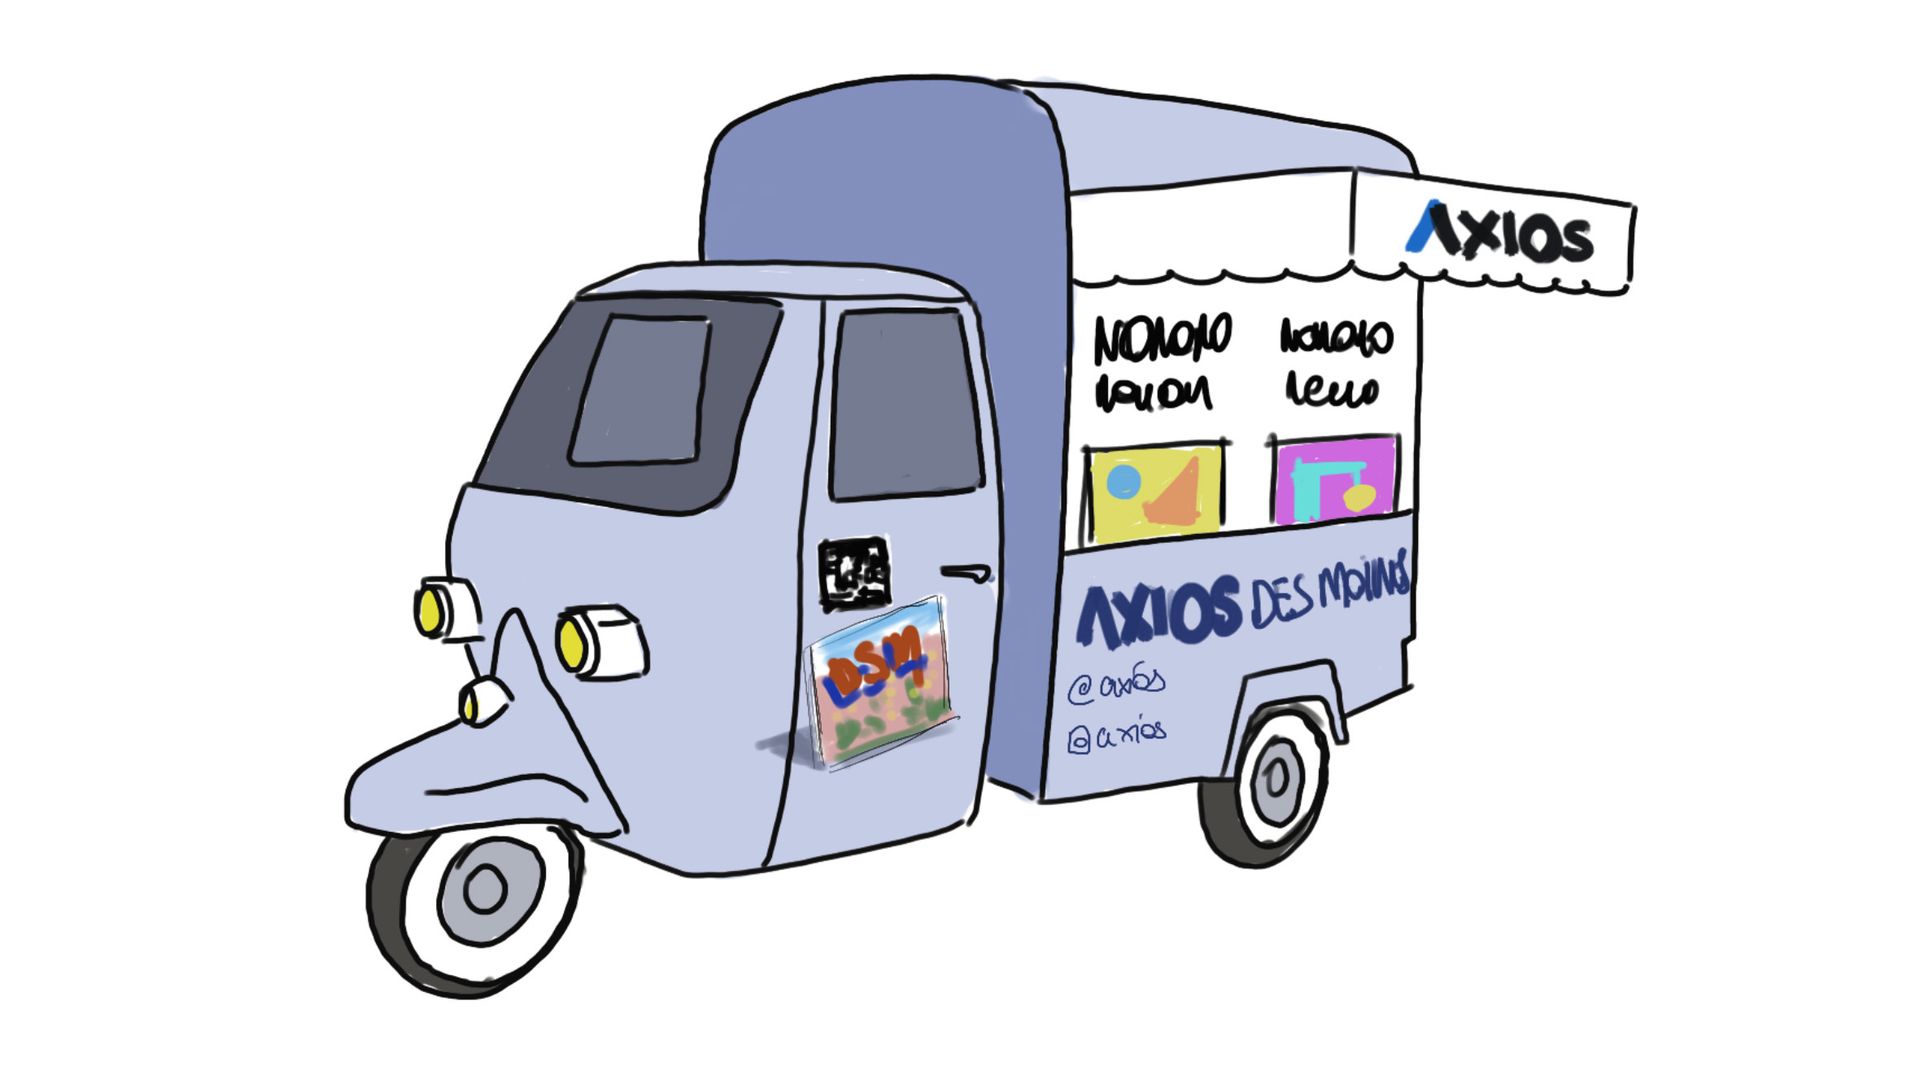 Our cool soapbox design that's inspired by old school newsstands. Drawing: Al Lucca/Axios